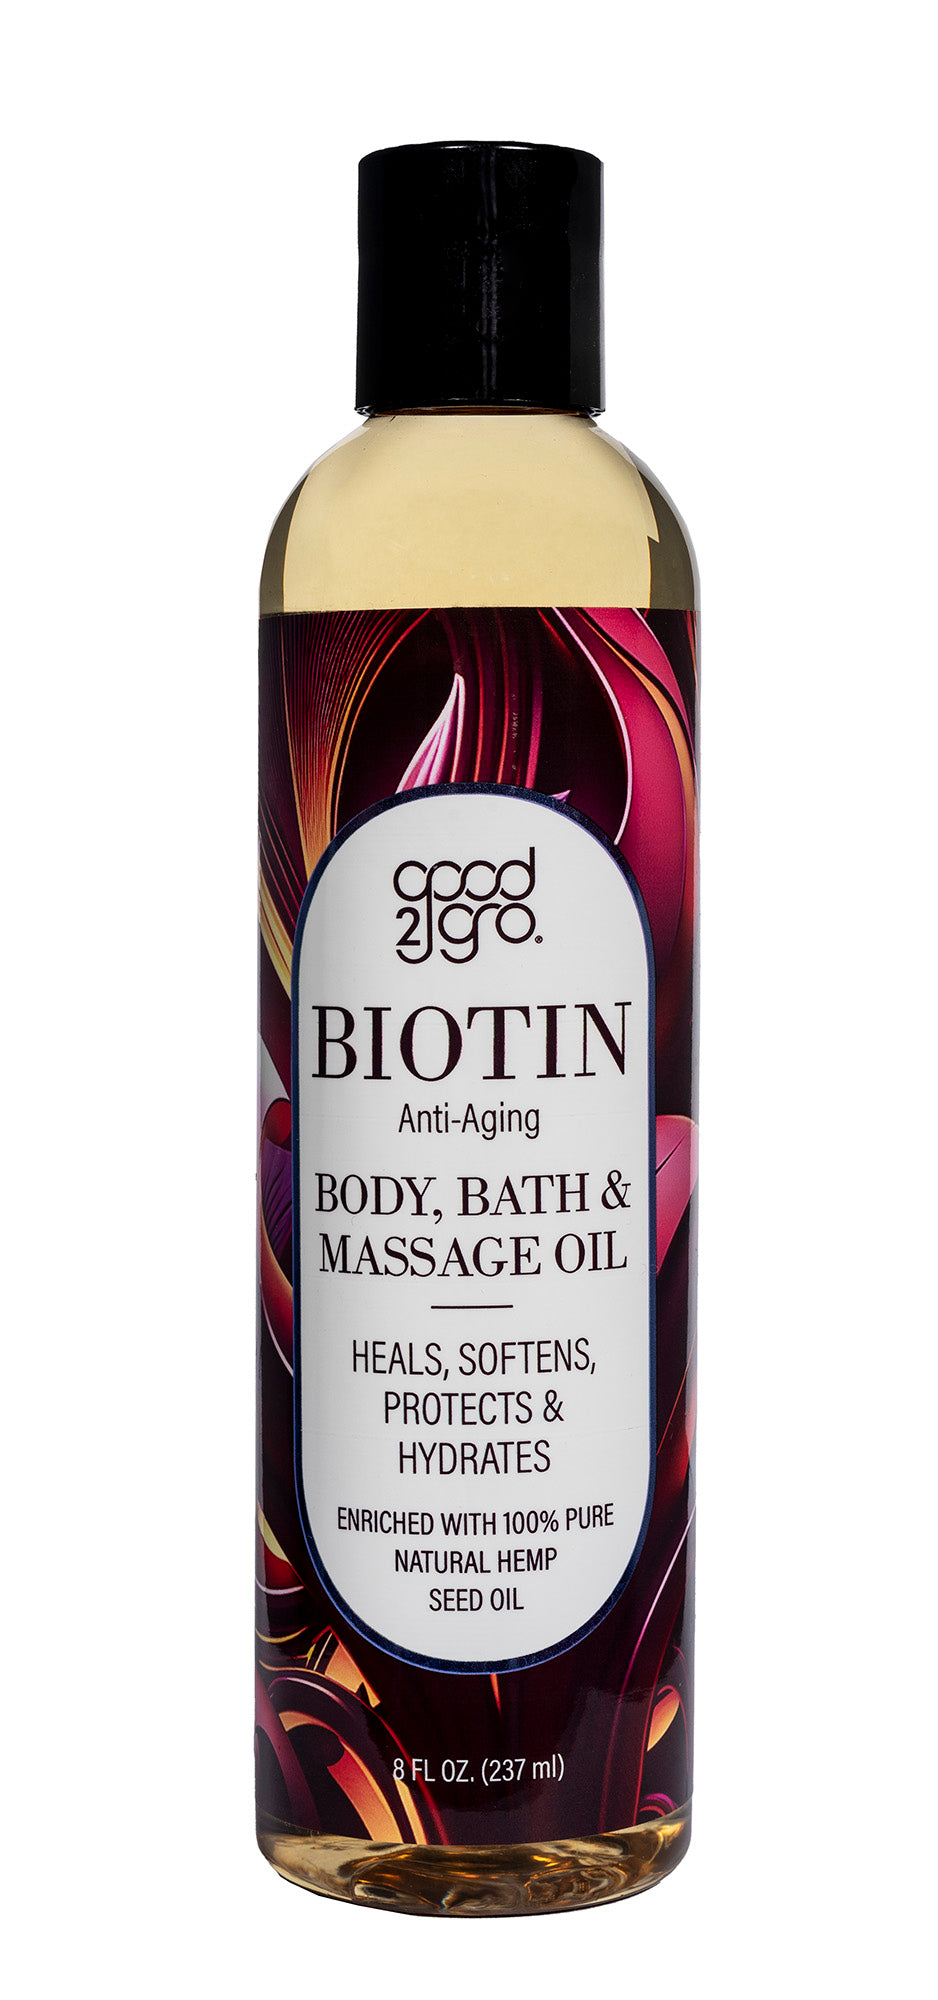 GOOD2GRO Biotin Oil, Anti-Aging Body, Bath & Massage, Helps Skin Regain Suppleness, Softens, Smoothes, Improves Elasticity, Crepey Skin, Stretch Marks and Evens Skin Tone 8oz.